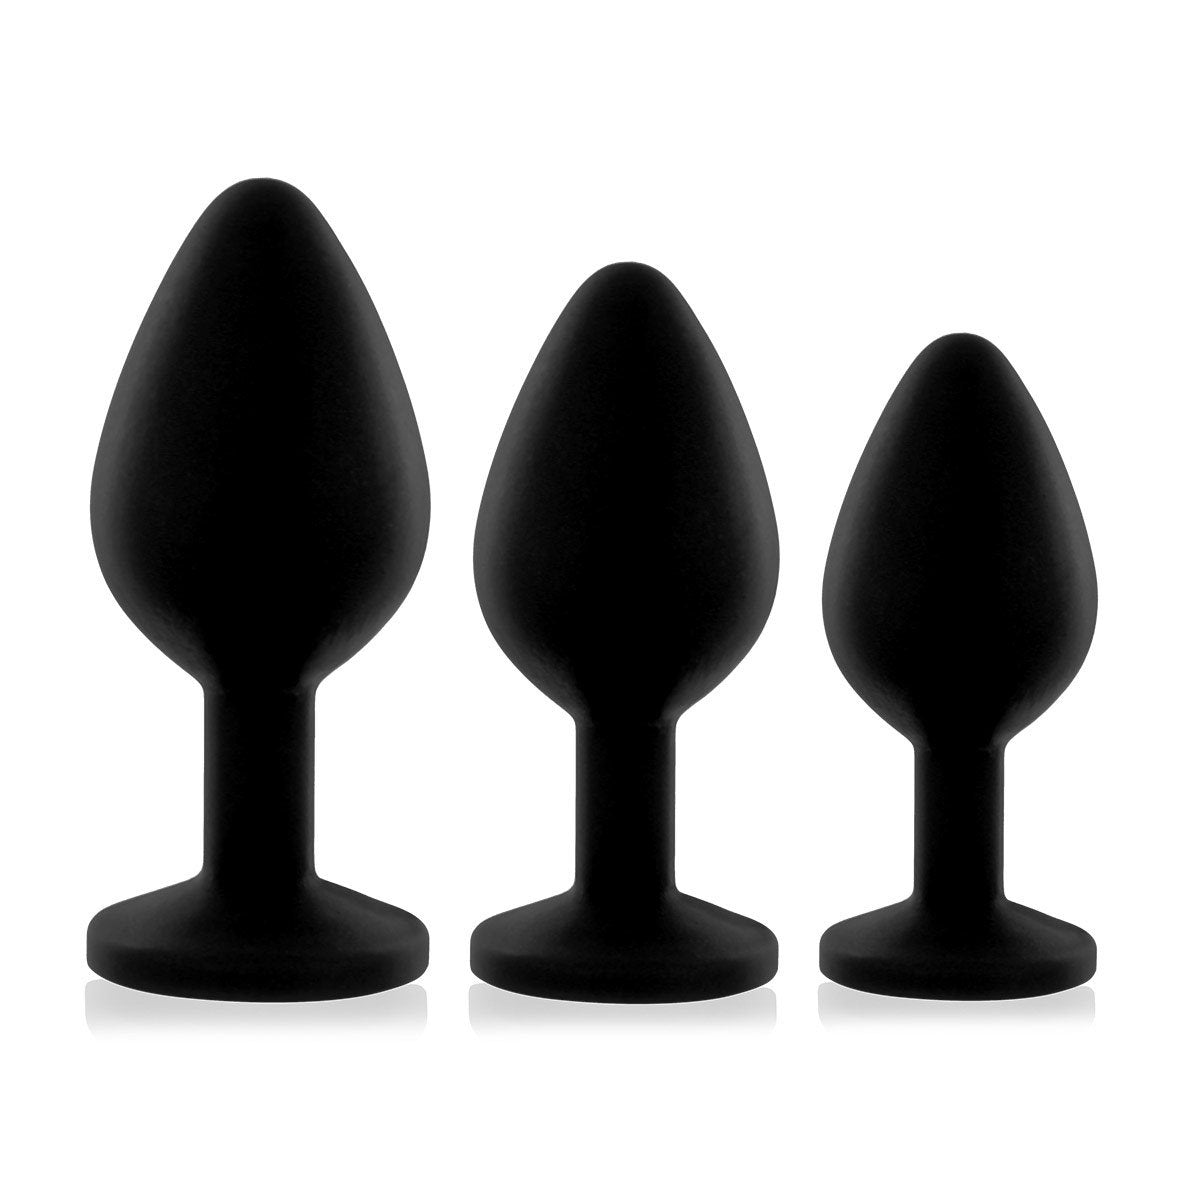 Rianne S Booty Plug Set - Buy At Luxury Toy X - Free 3-Day Shipping